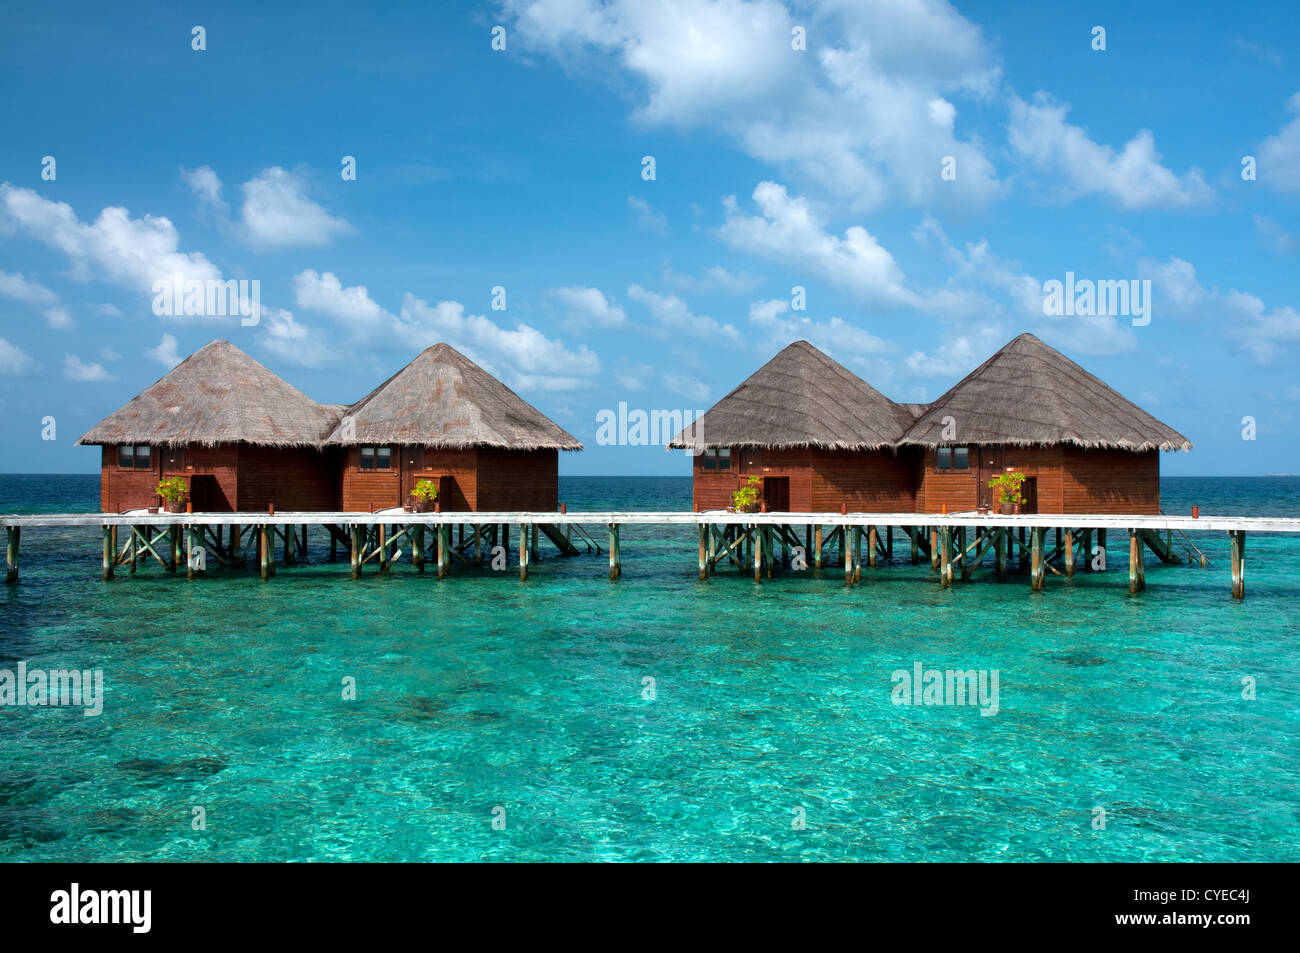 Overwater bungalows in beautiful blue lagoon, Maldives Stock Photo